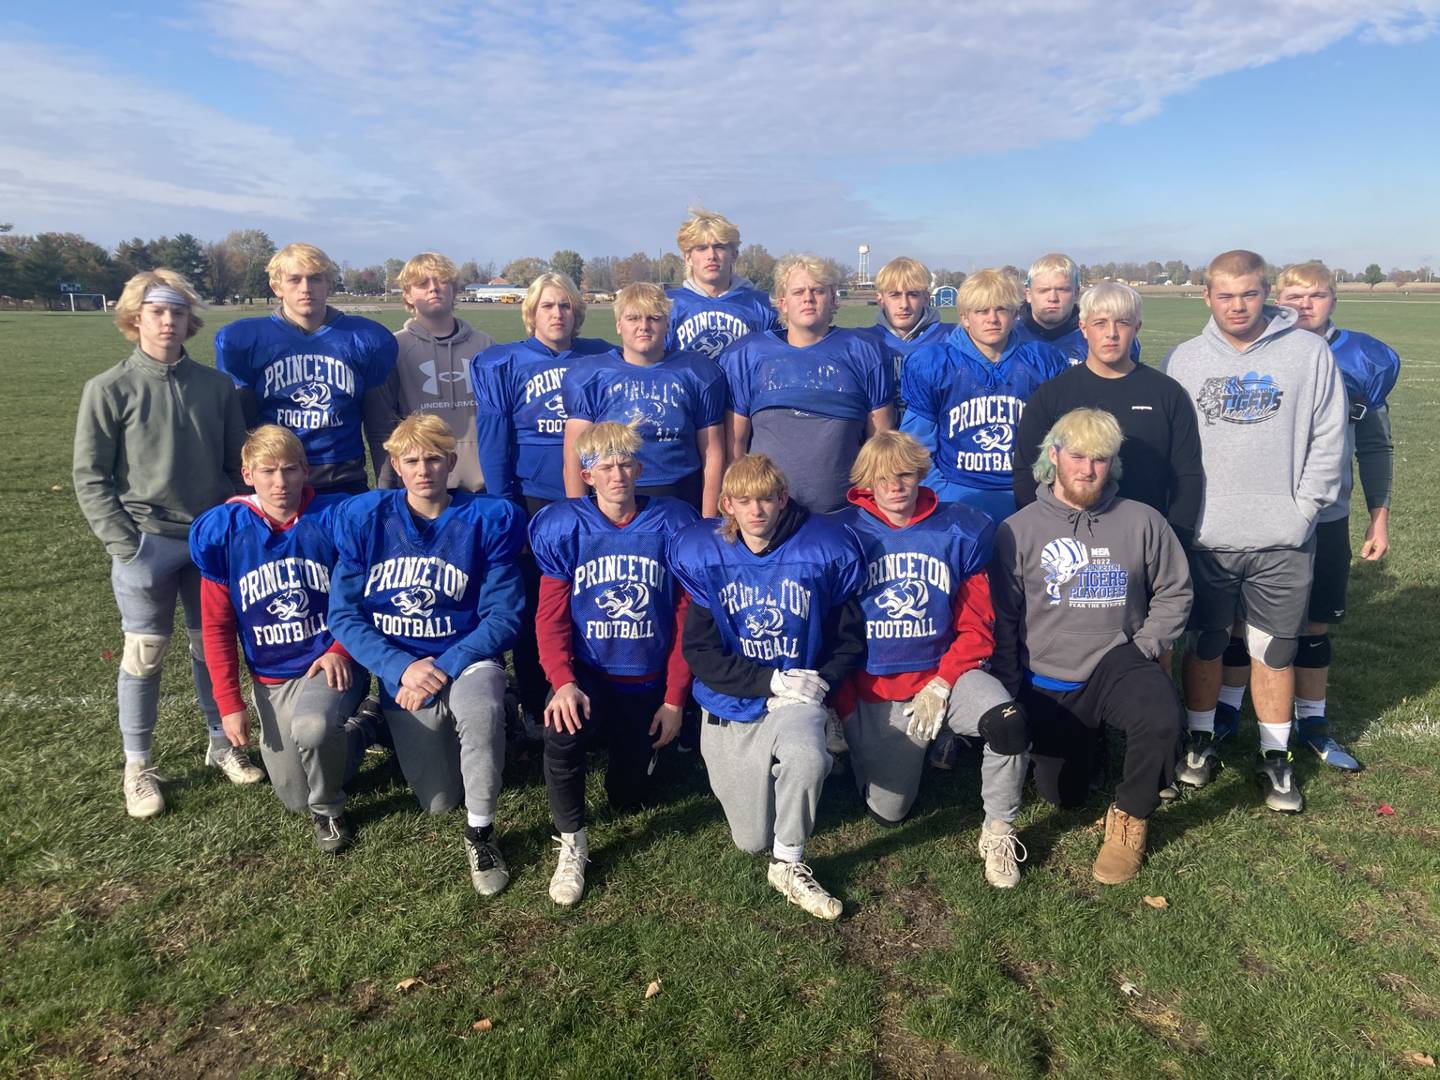 A large percentage of members of the Princeton Tiger football team dyed their hair blonde for team bonding. They say blondes have more fun and they hope to have more fun on the field